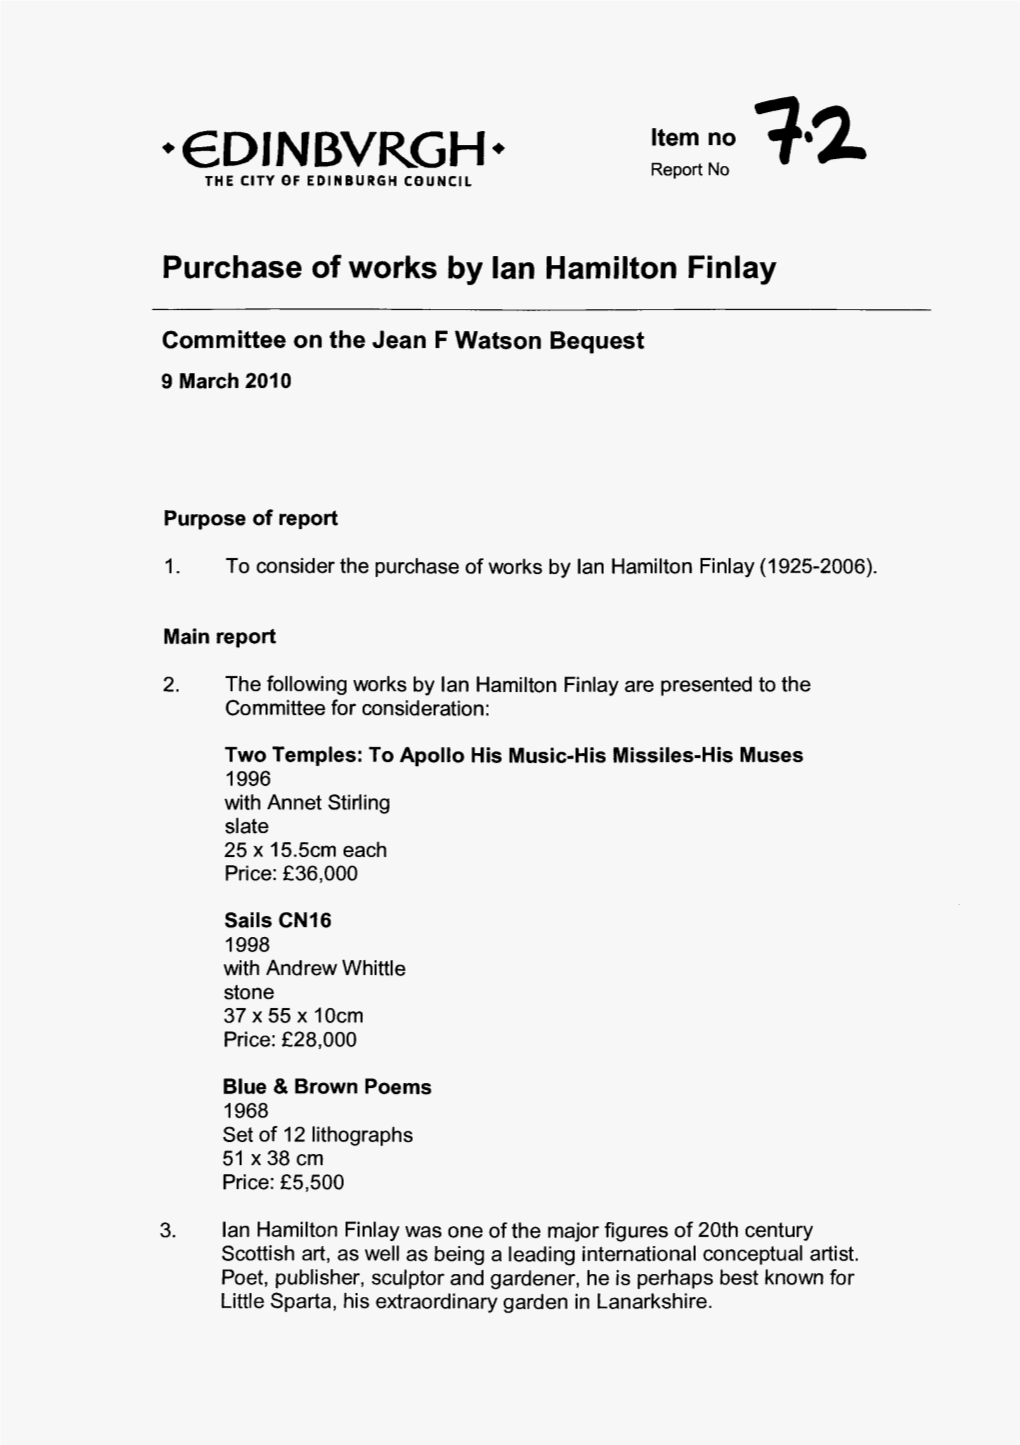 Purchase of Works by Ian Hamilton Finlay